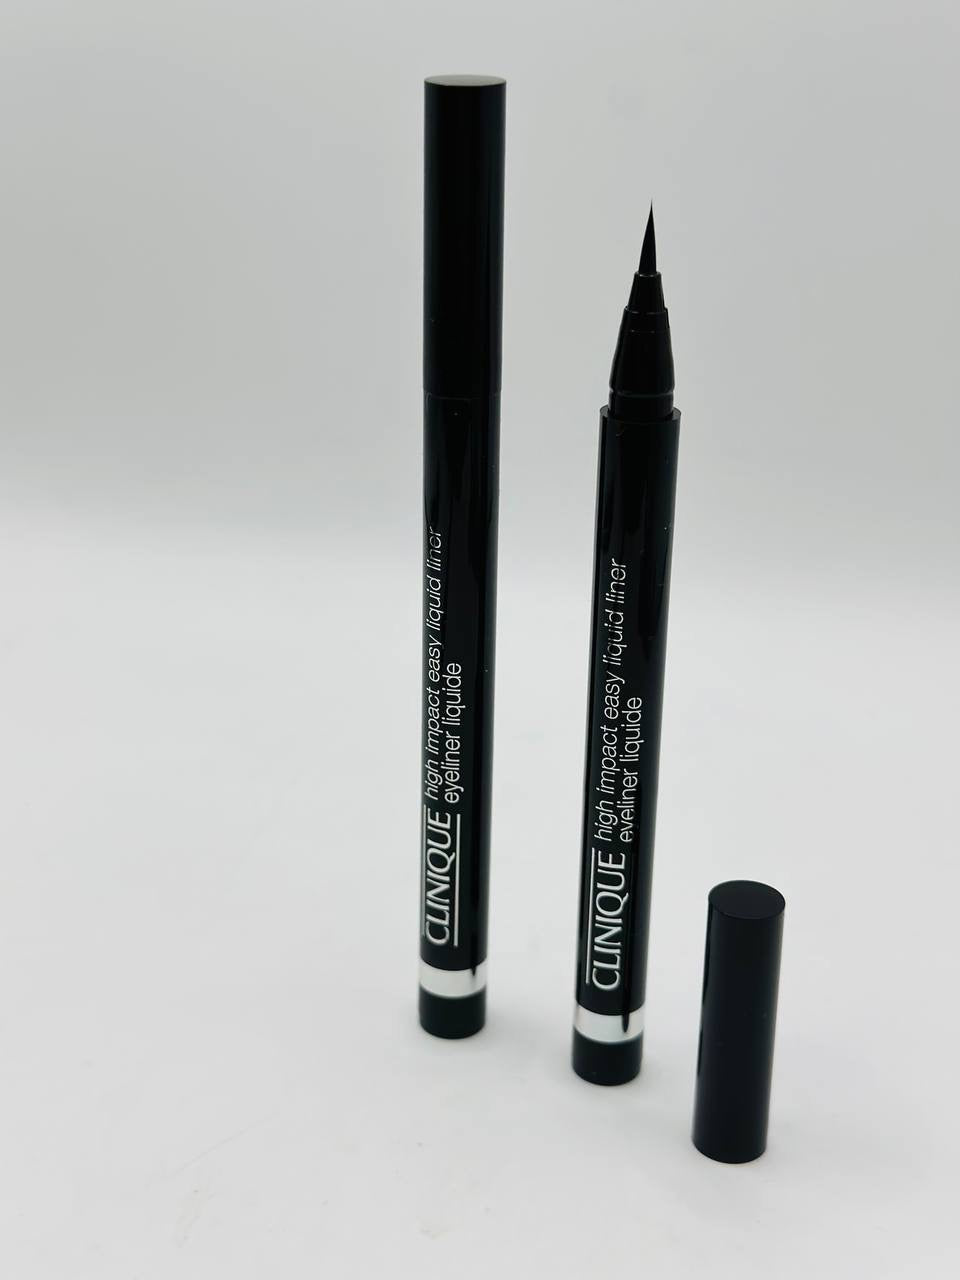 Clinique eyeliner